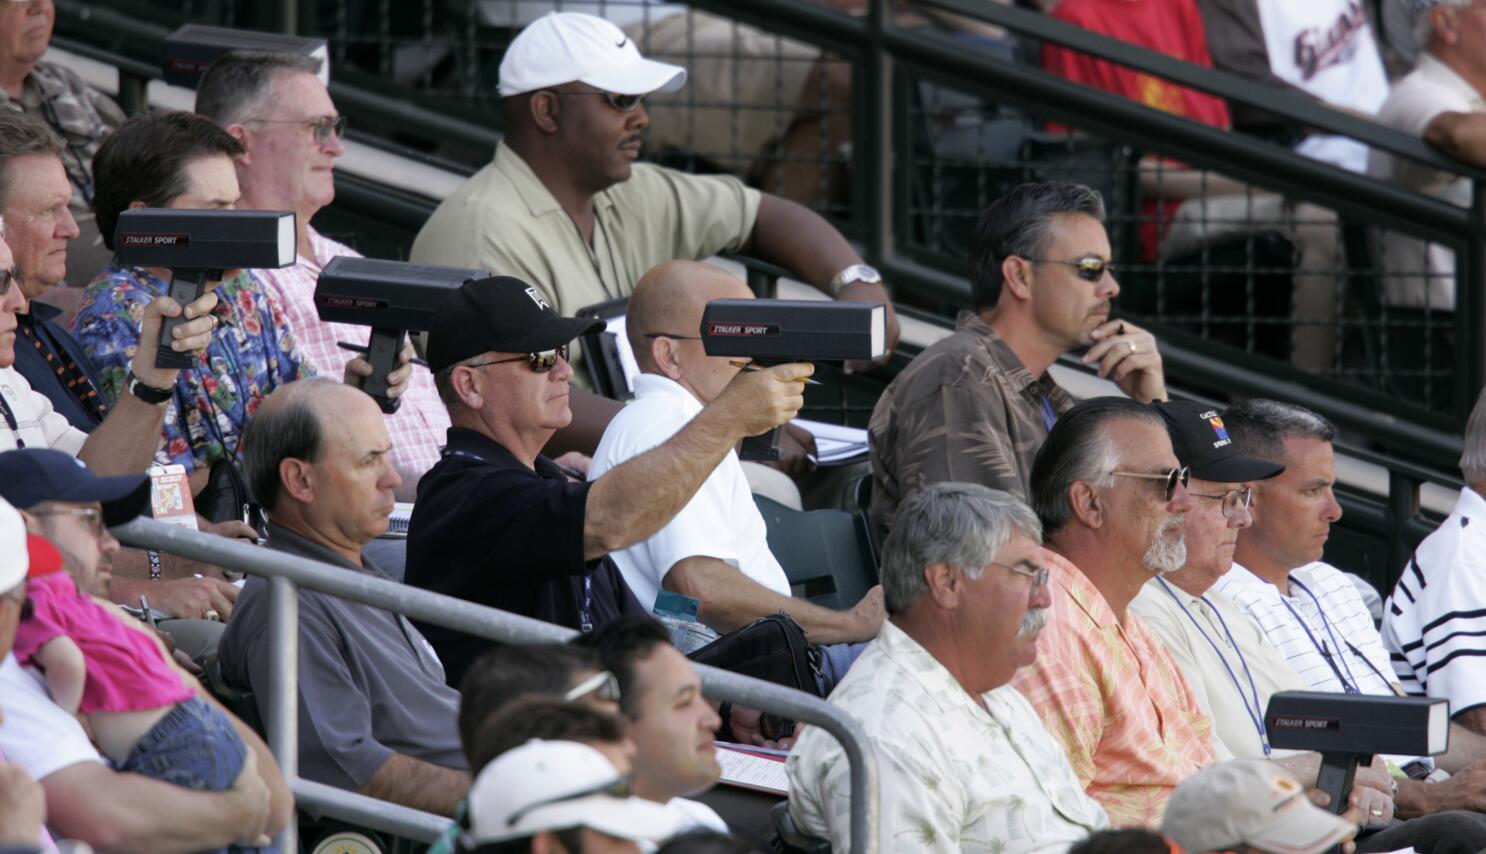 17 former MLB scouts suing league for age discrimination